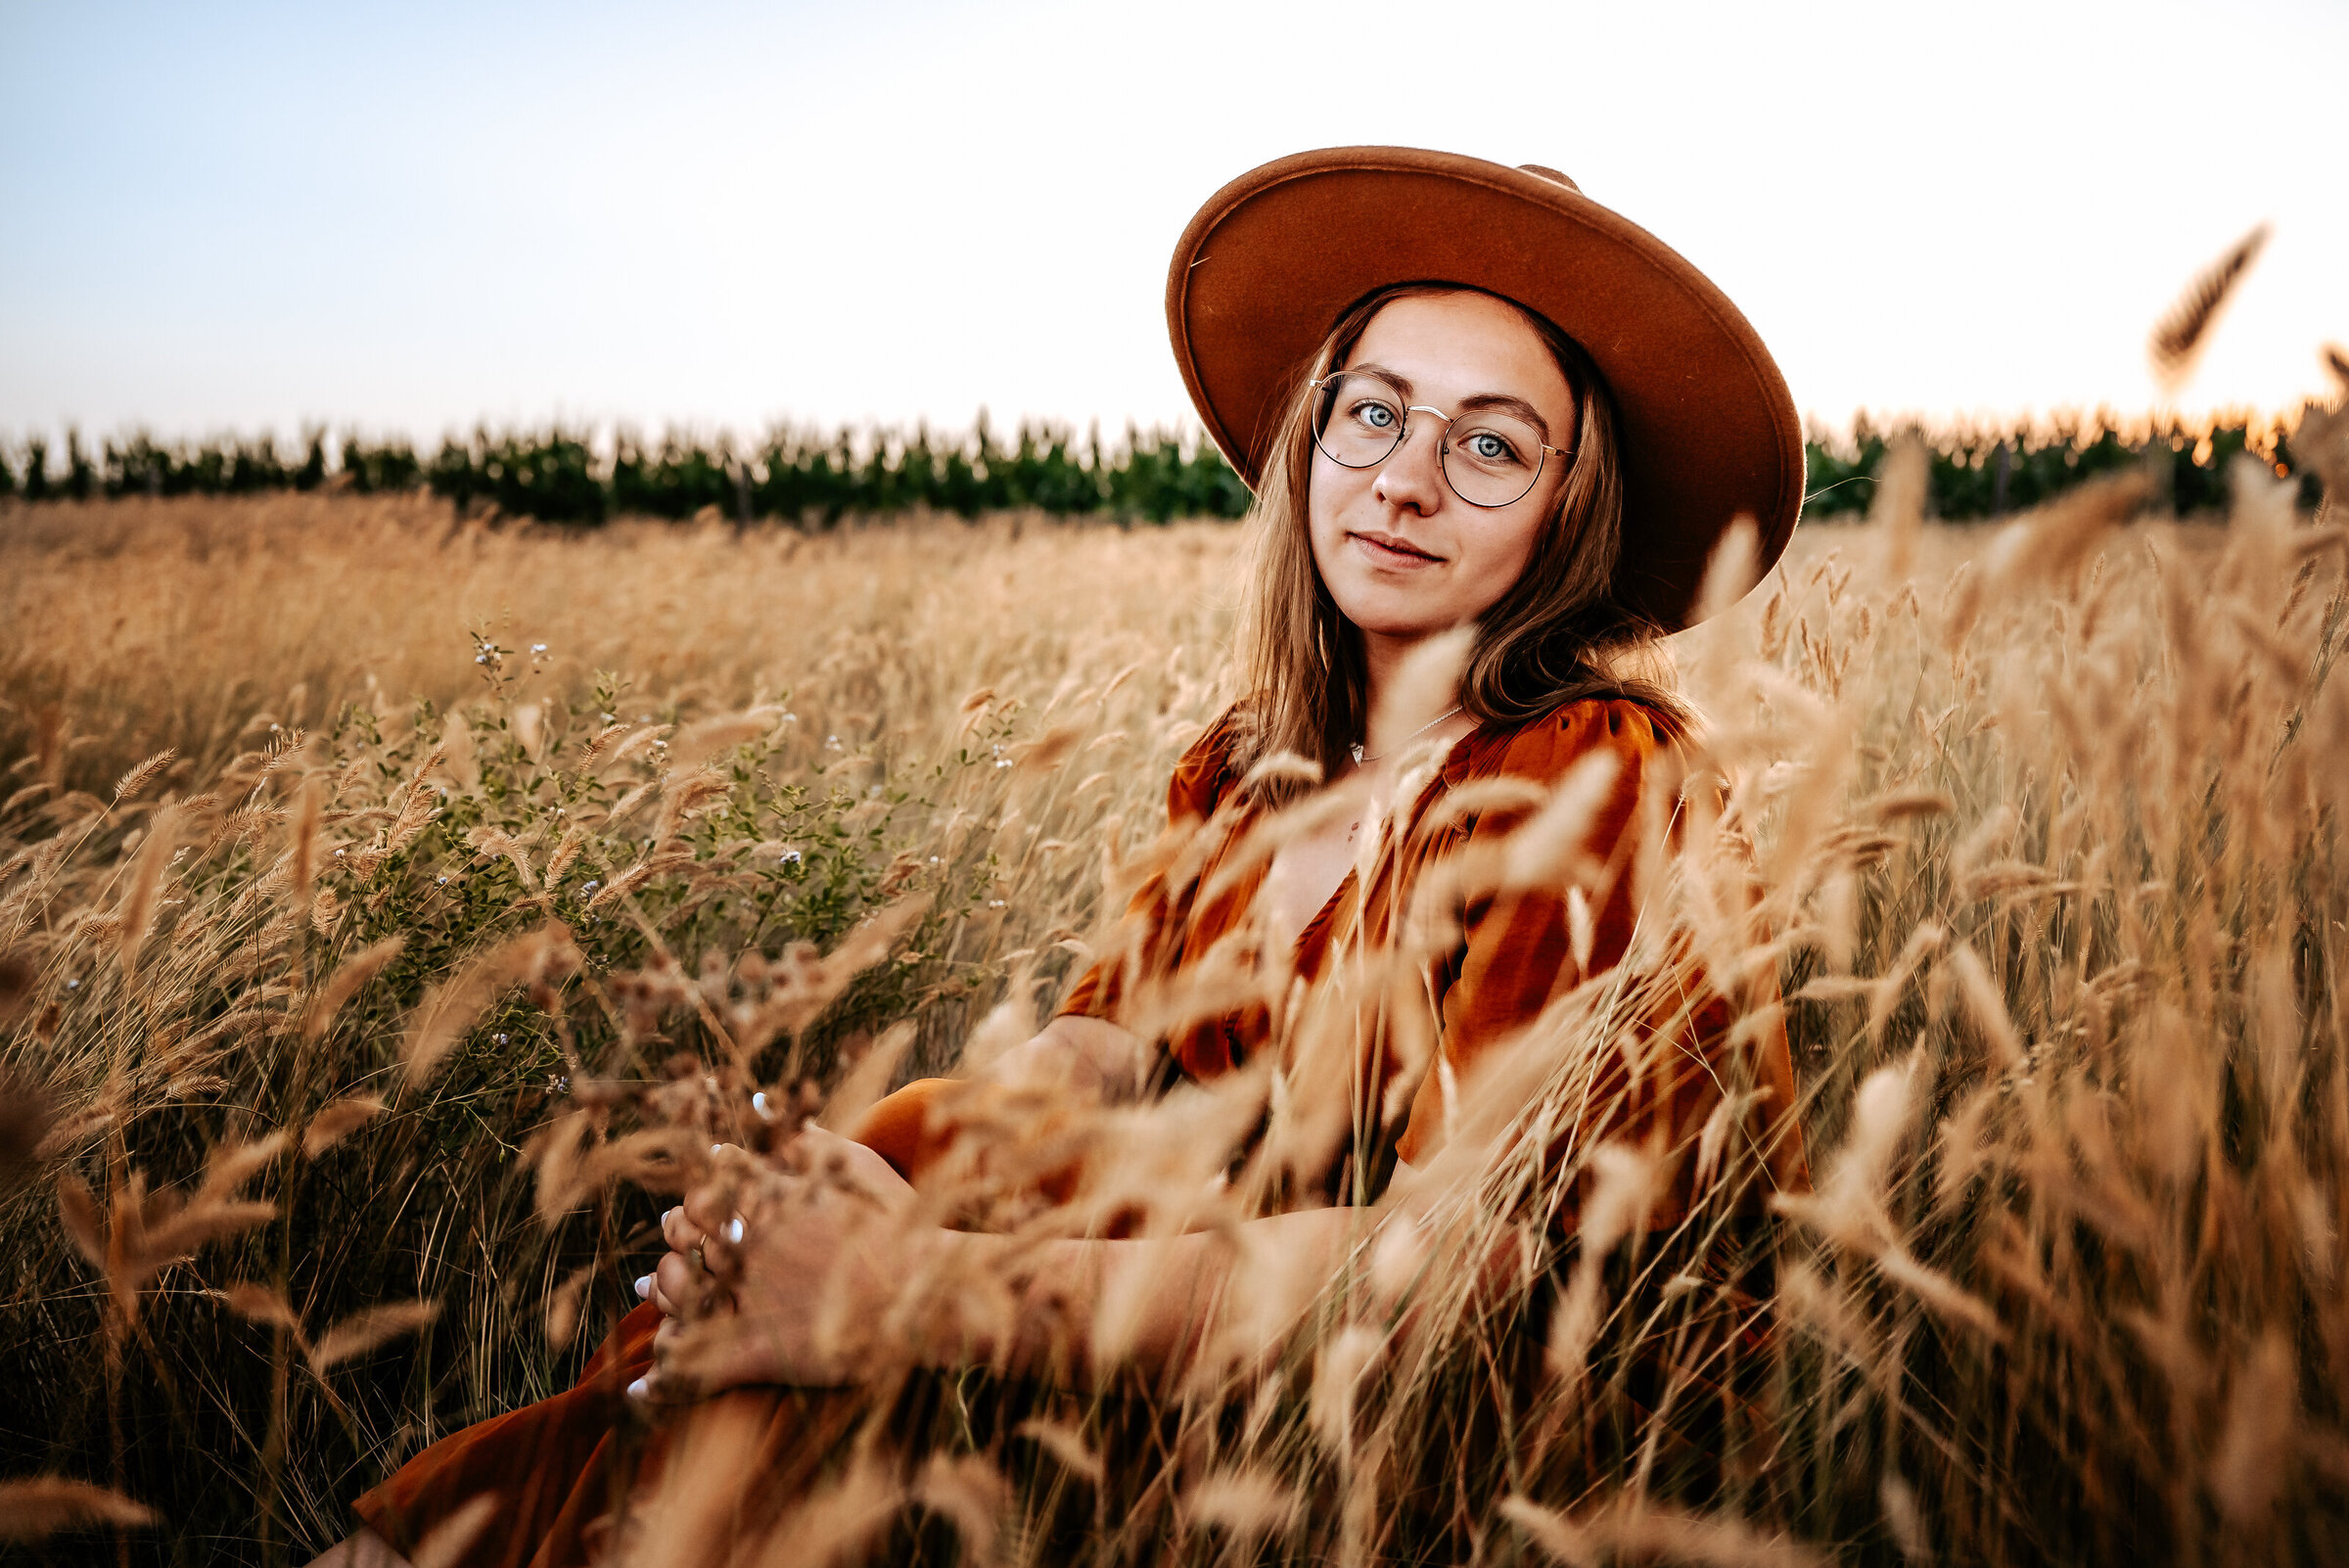 Girl with wide brim felt hat, round glasses, and rust colored dress sit in long grass